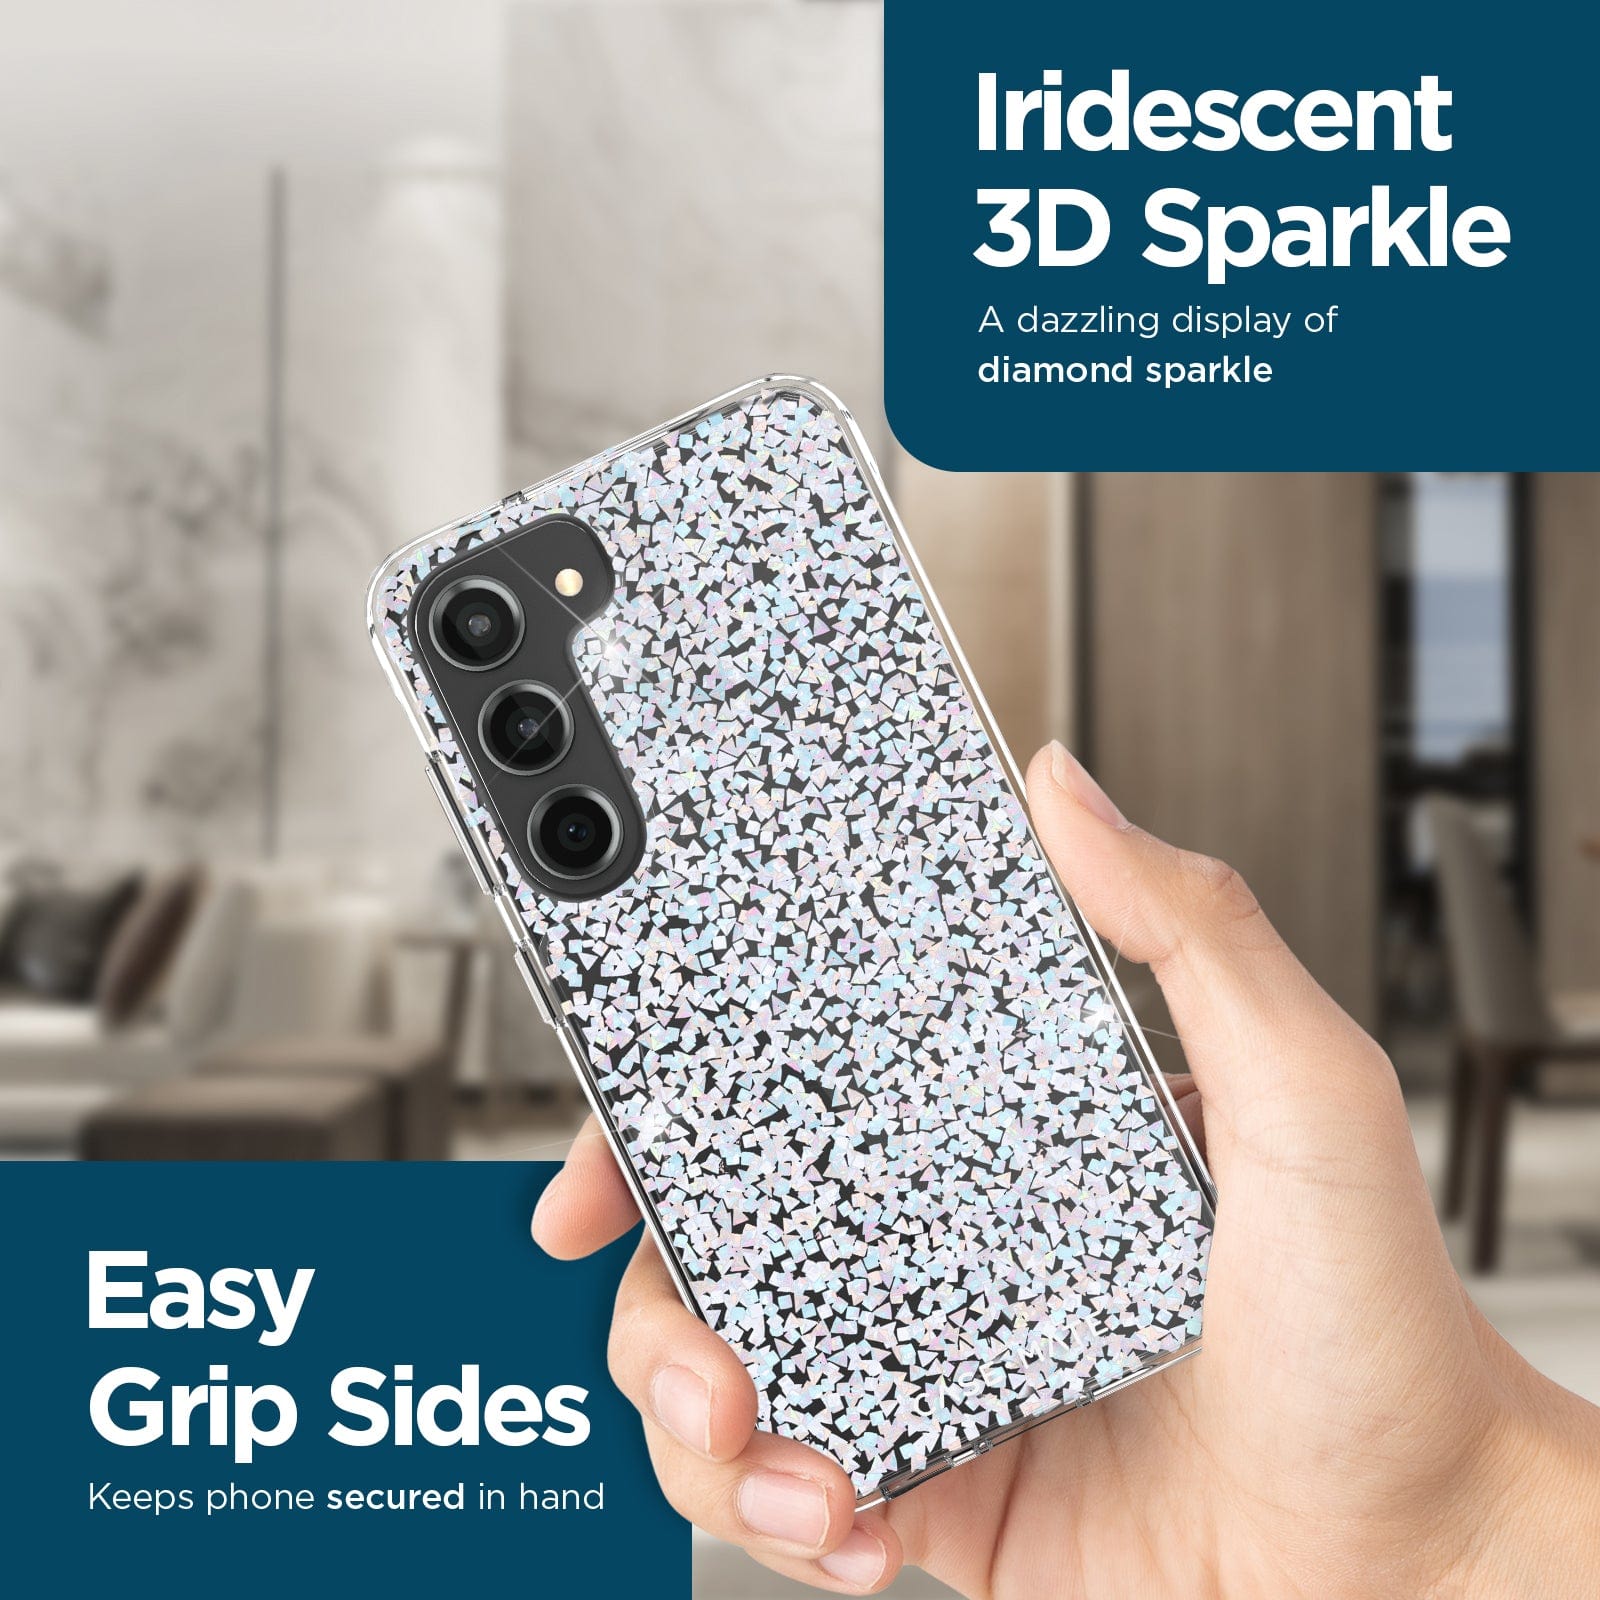 IRIDESCENT 3D SPARKLE. DAZZLING DISPLAY OF DIAMOND SPARKLE. EASY GRIP SIDES. KEEPS PHONE SECURED IN HAND.